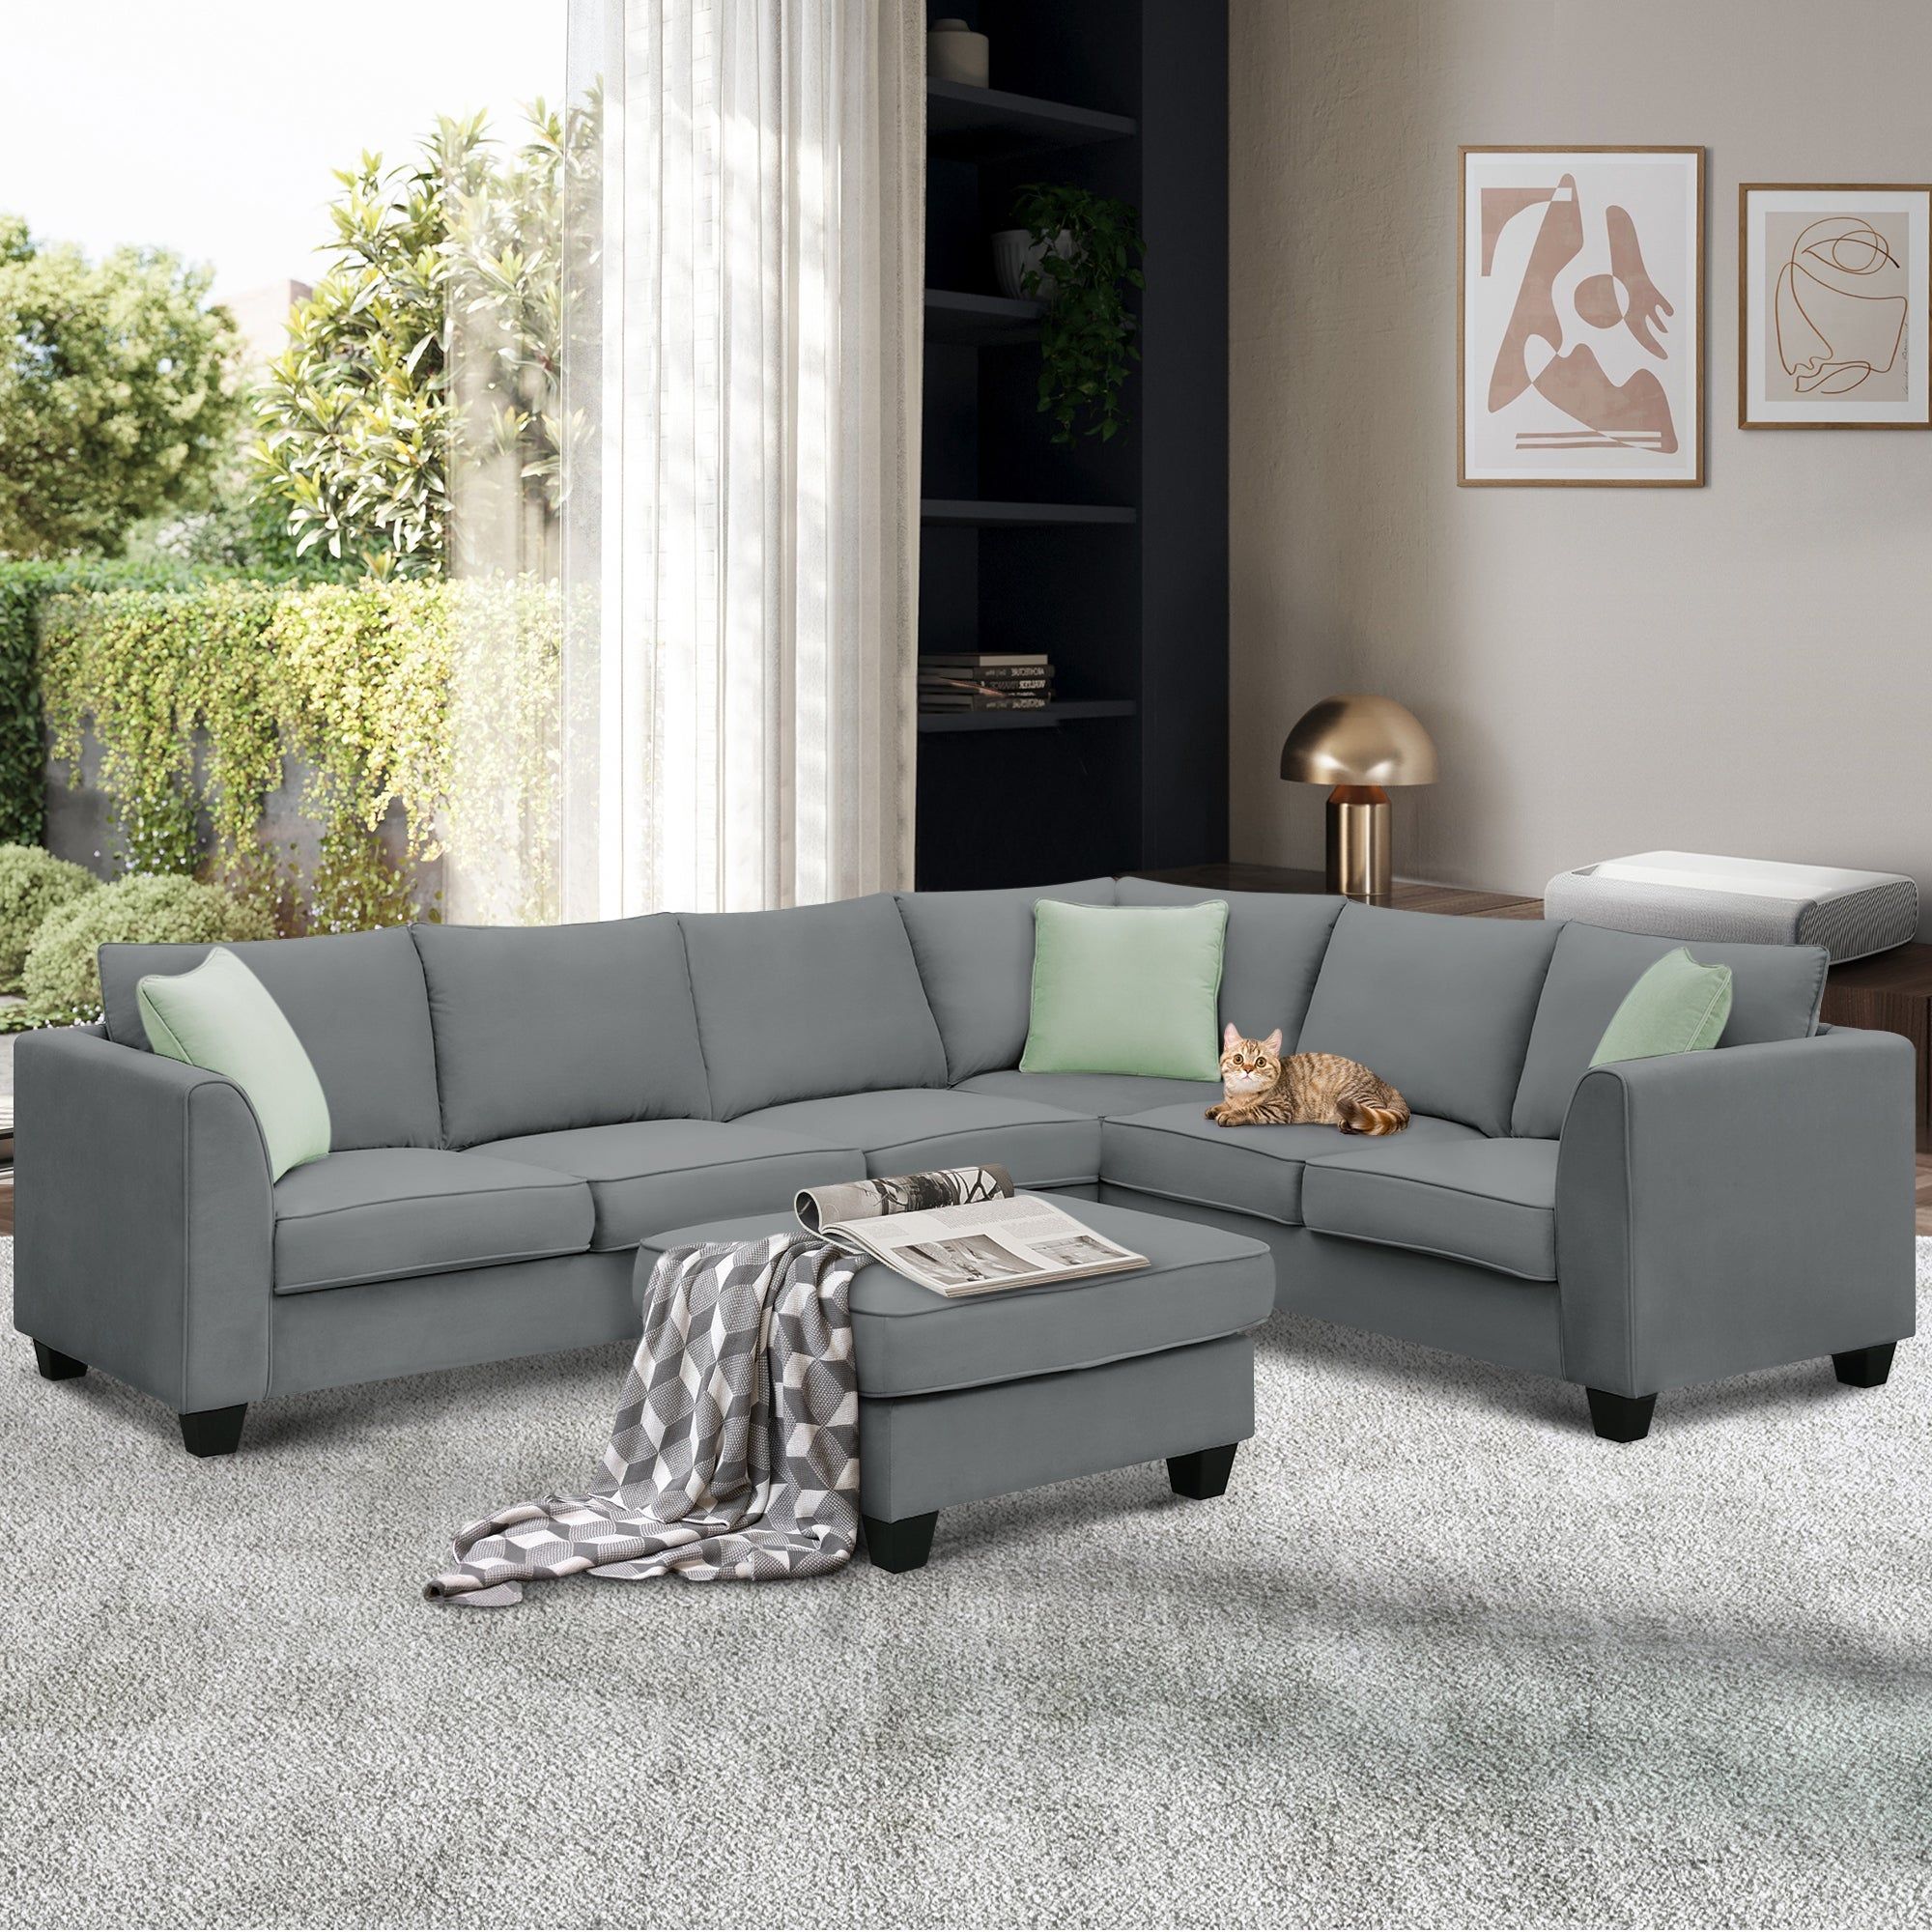 Featured Photo of 7-Seater Sectional Couch With Ottoman and 3 Pillows